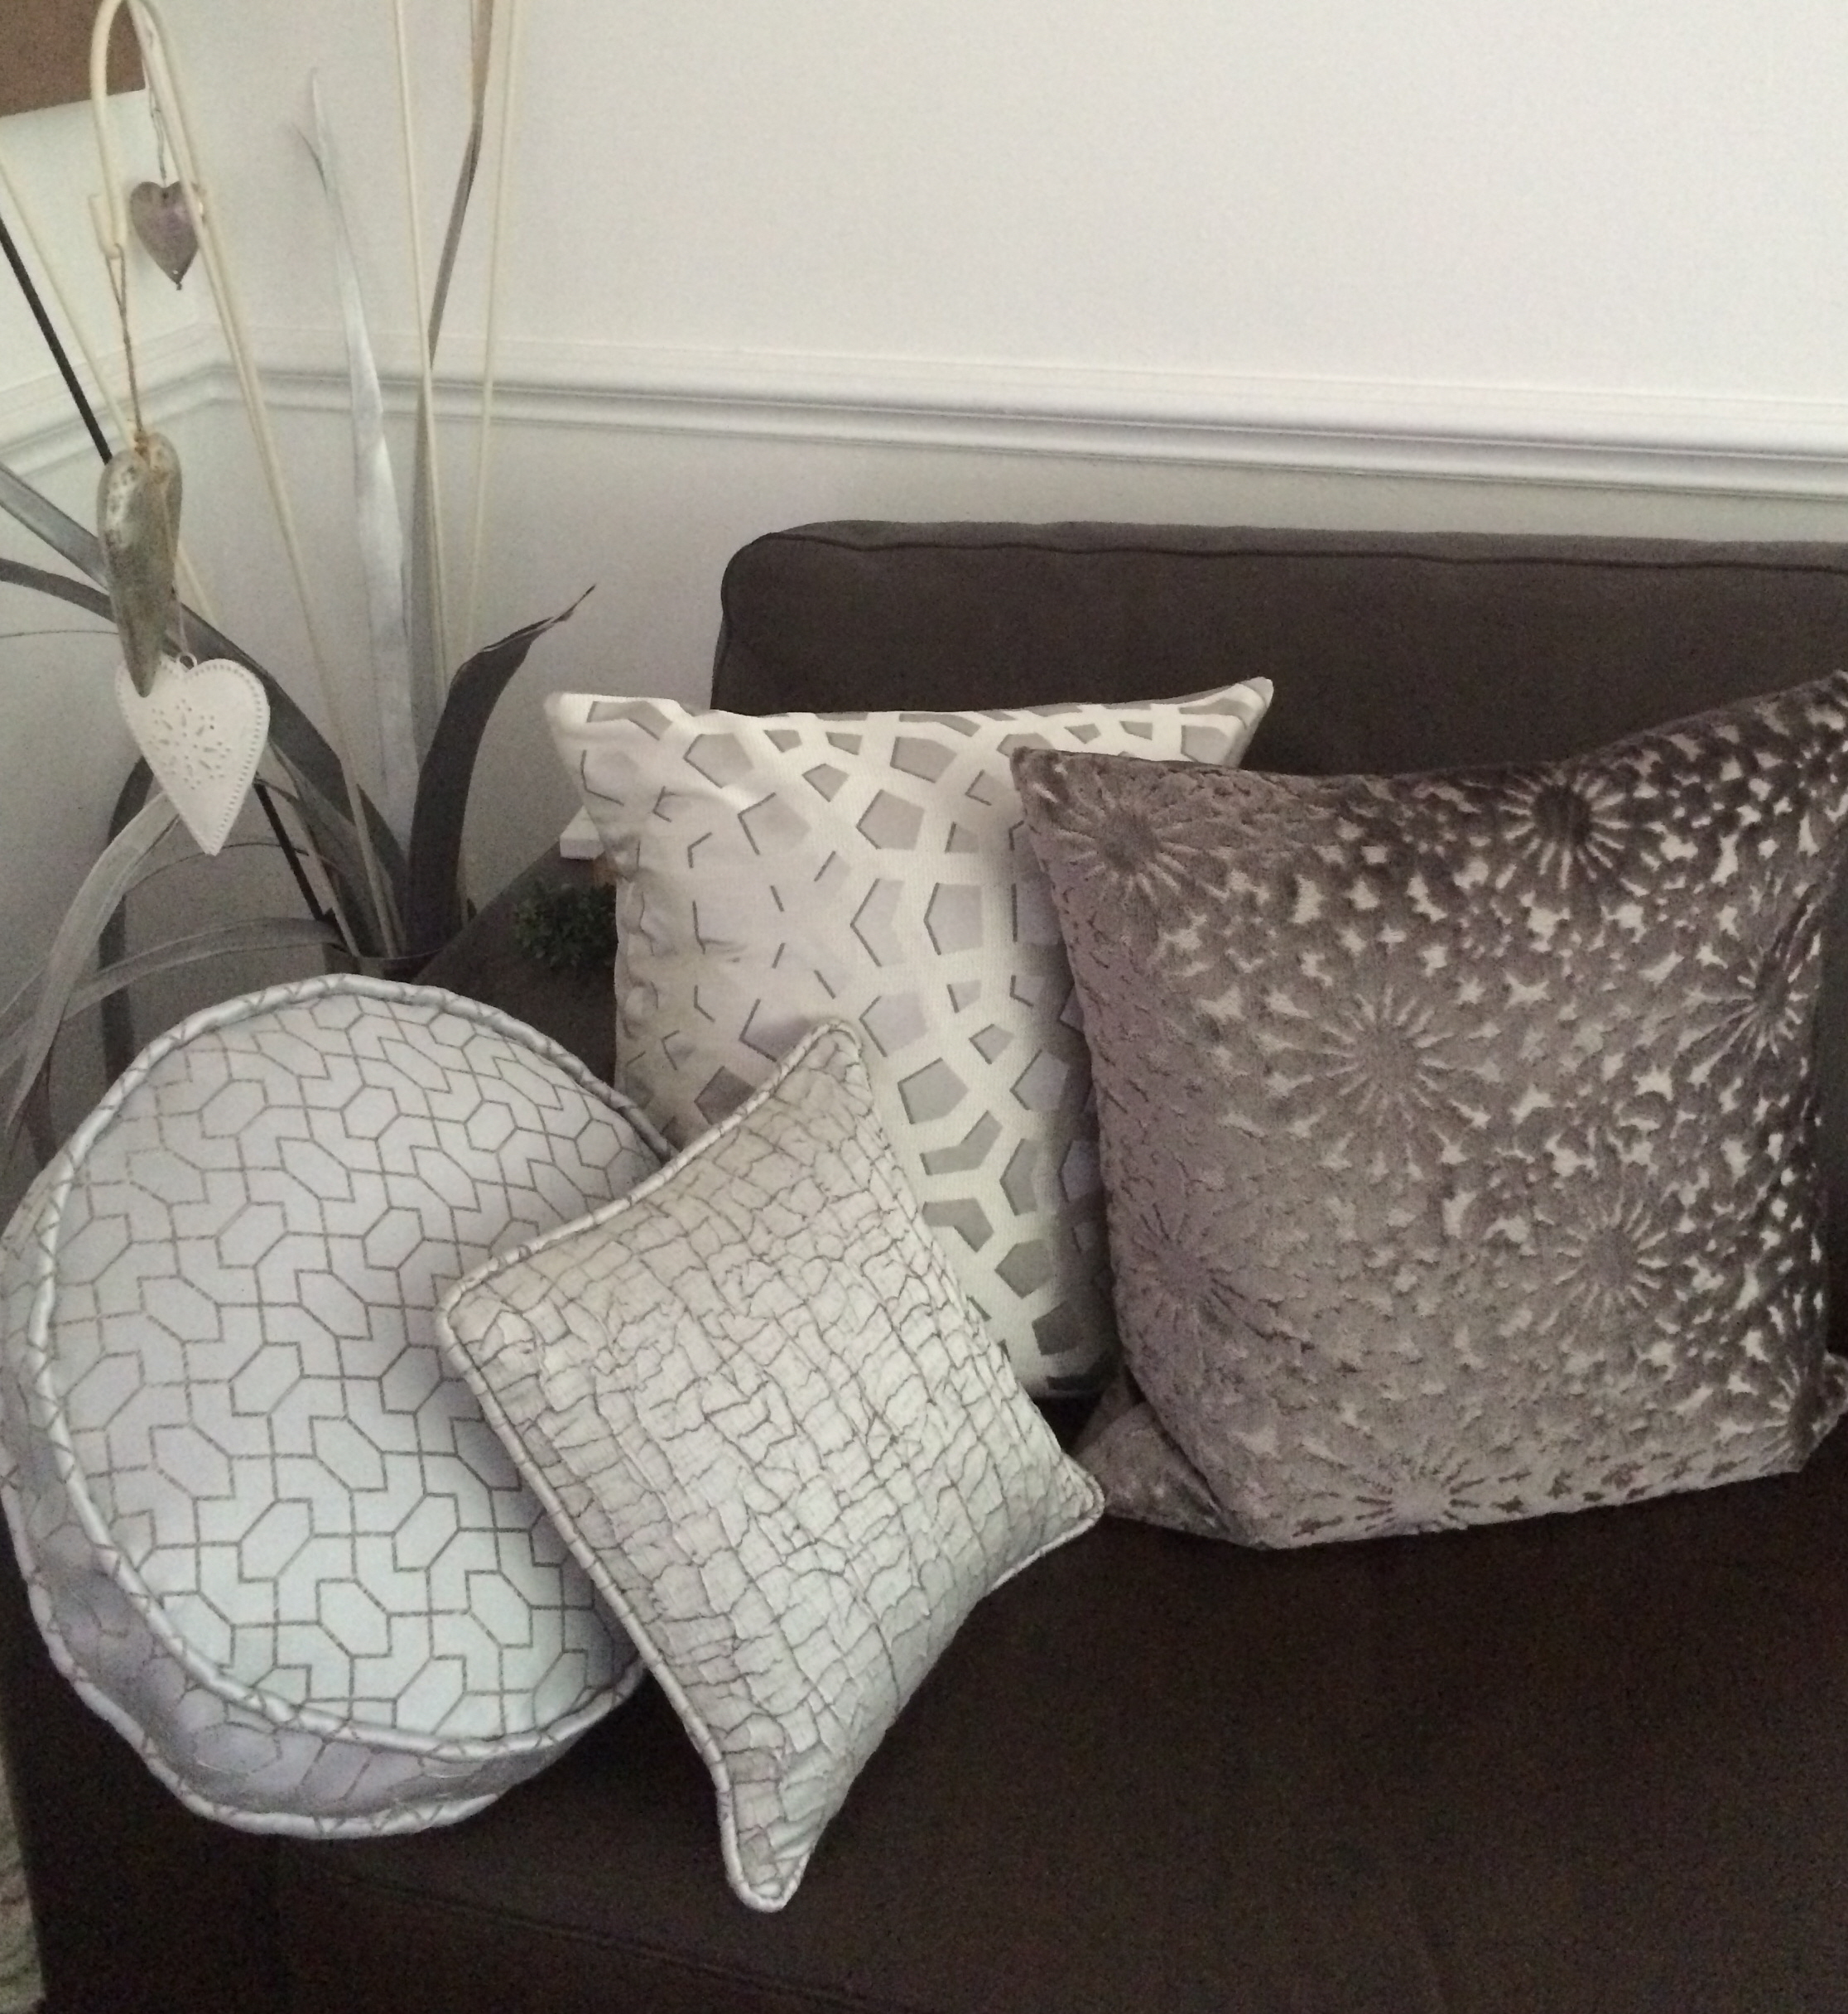 Cushions-from-Znc--Black-Edition--Romo-and-James-Hare---Resize.jpg